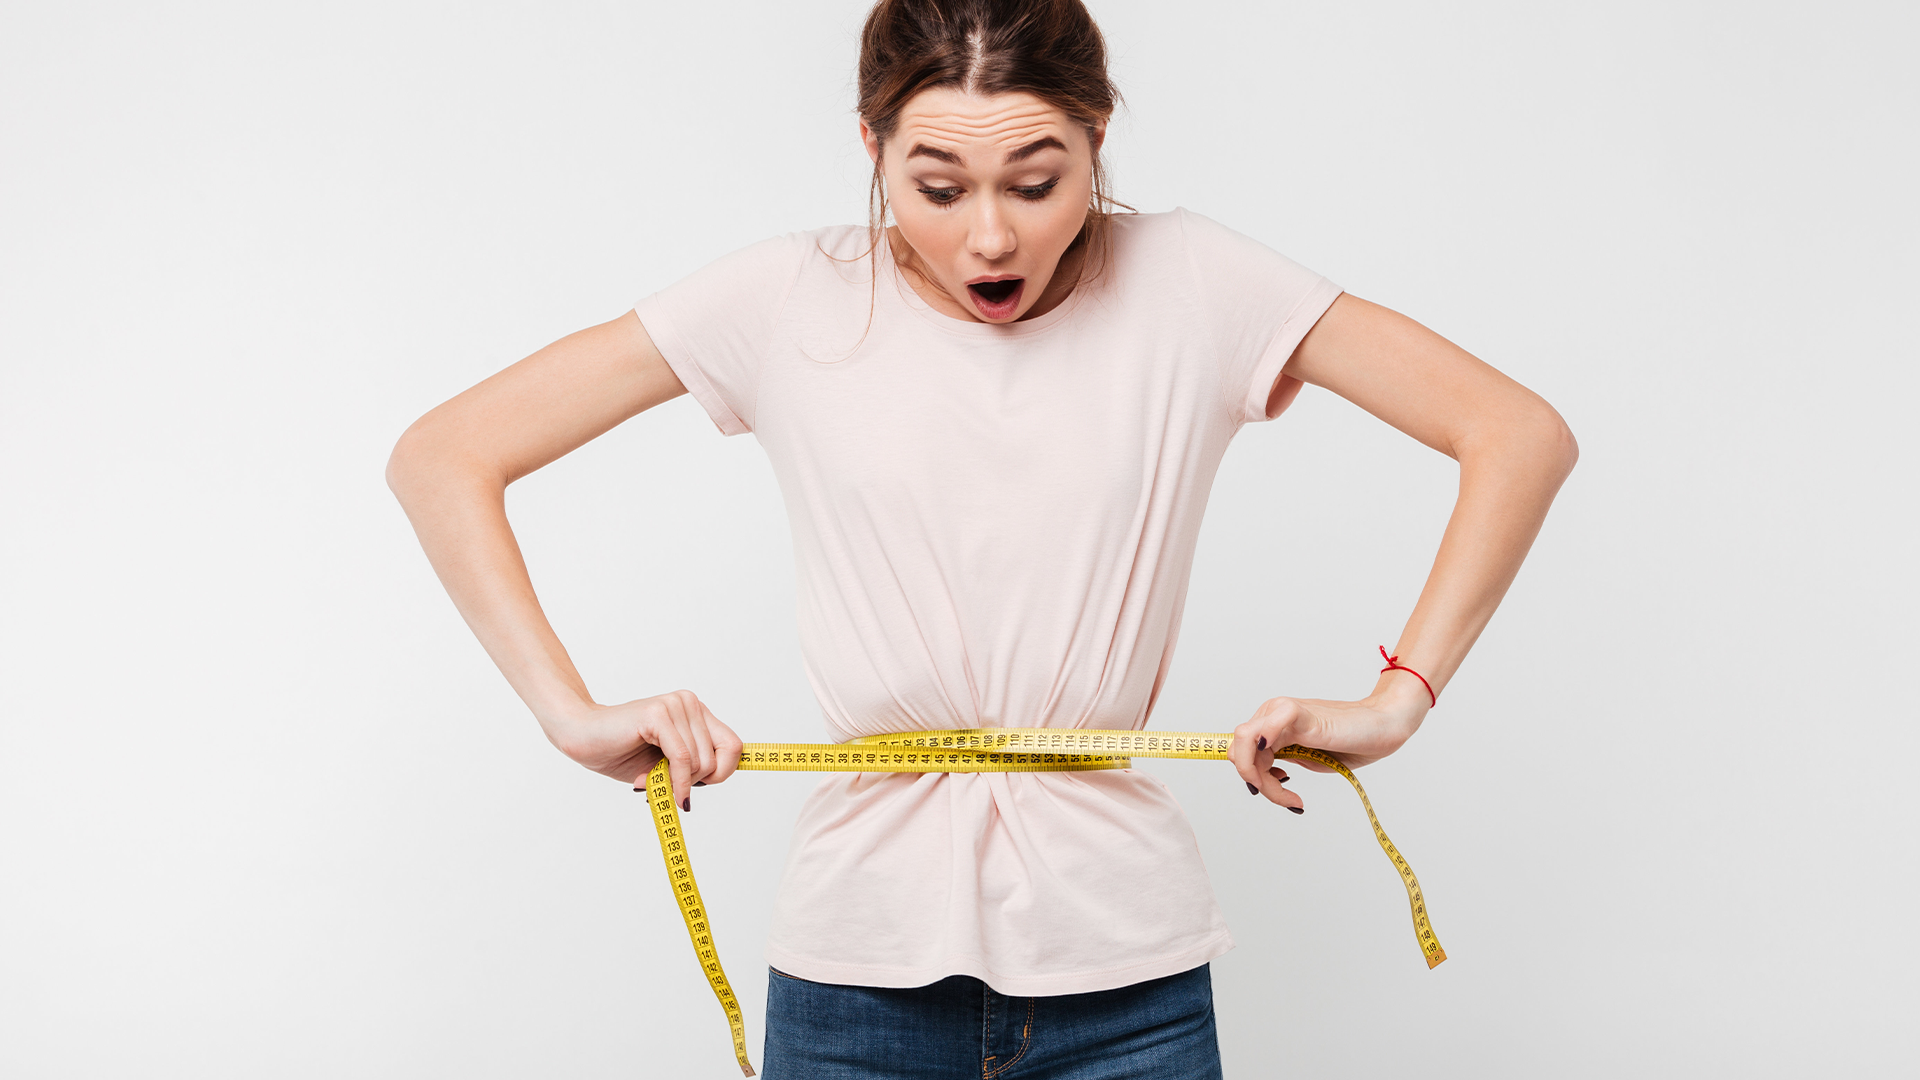 Weight Loss Safety - Mitigate Risk of Liberating 'Fat Stored Toxins'